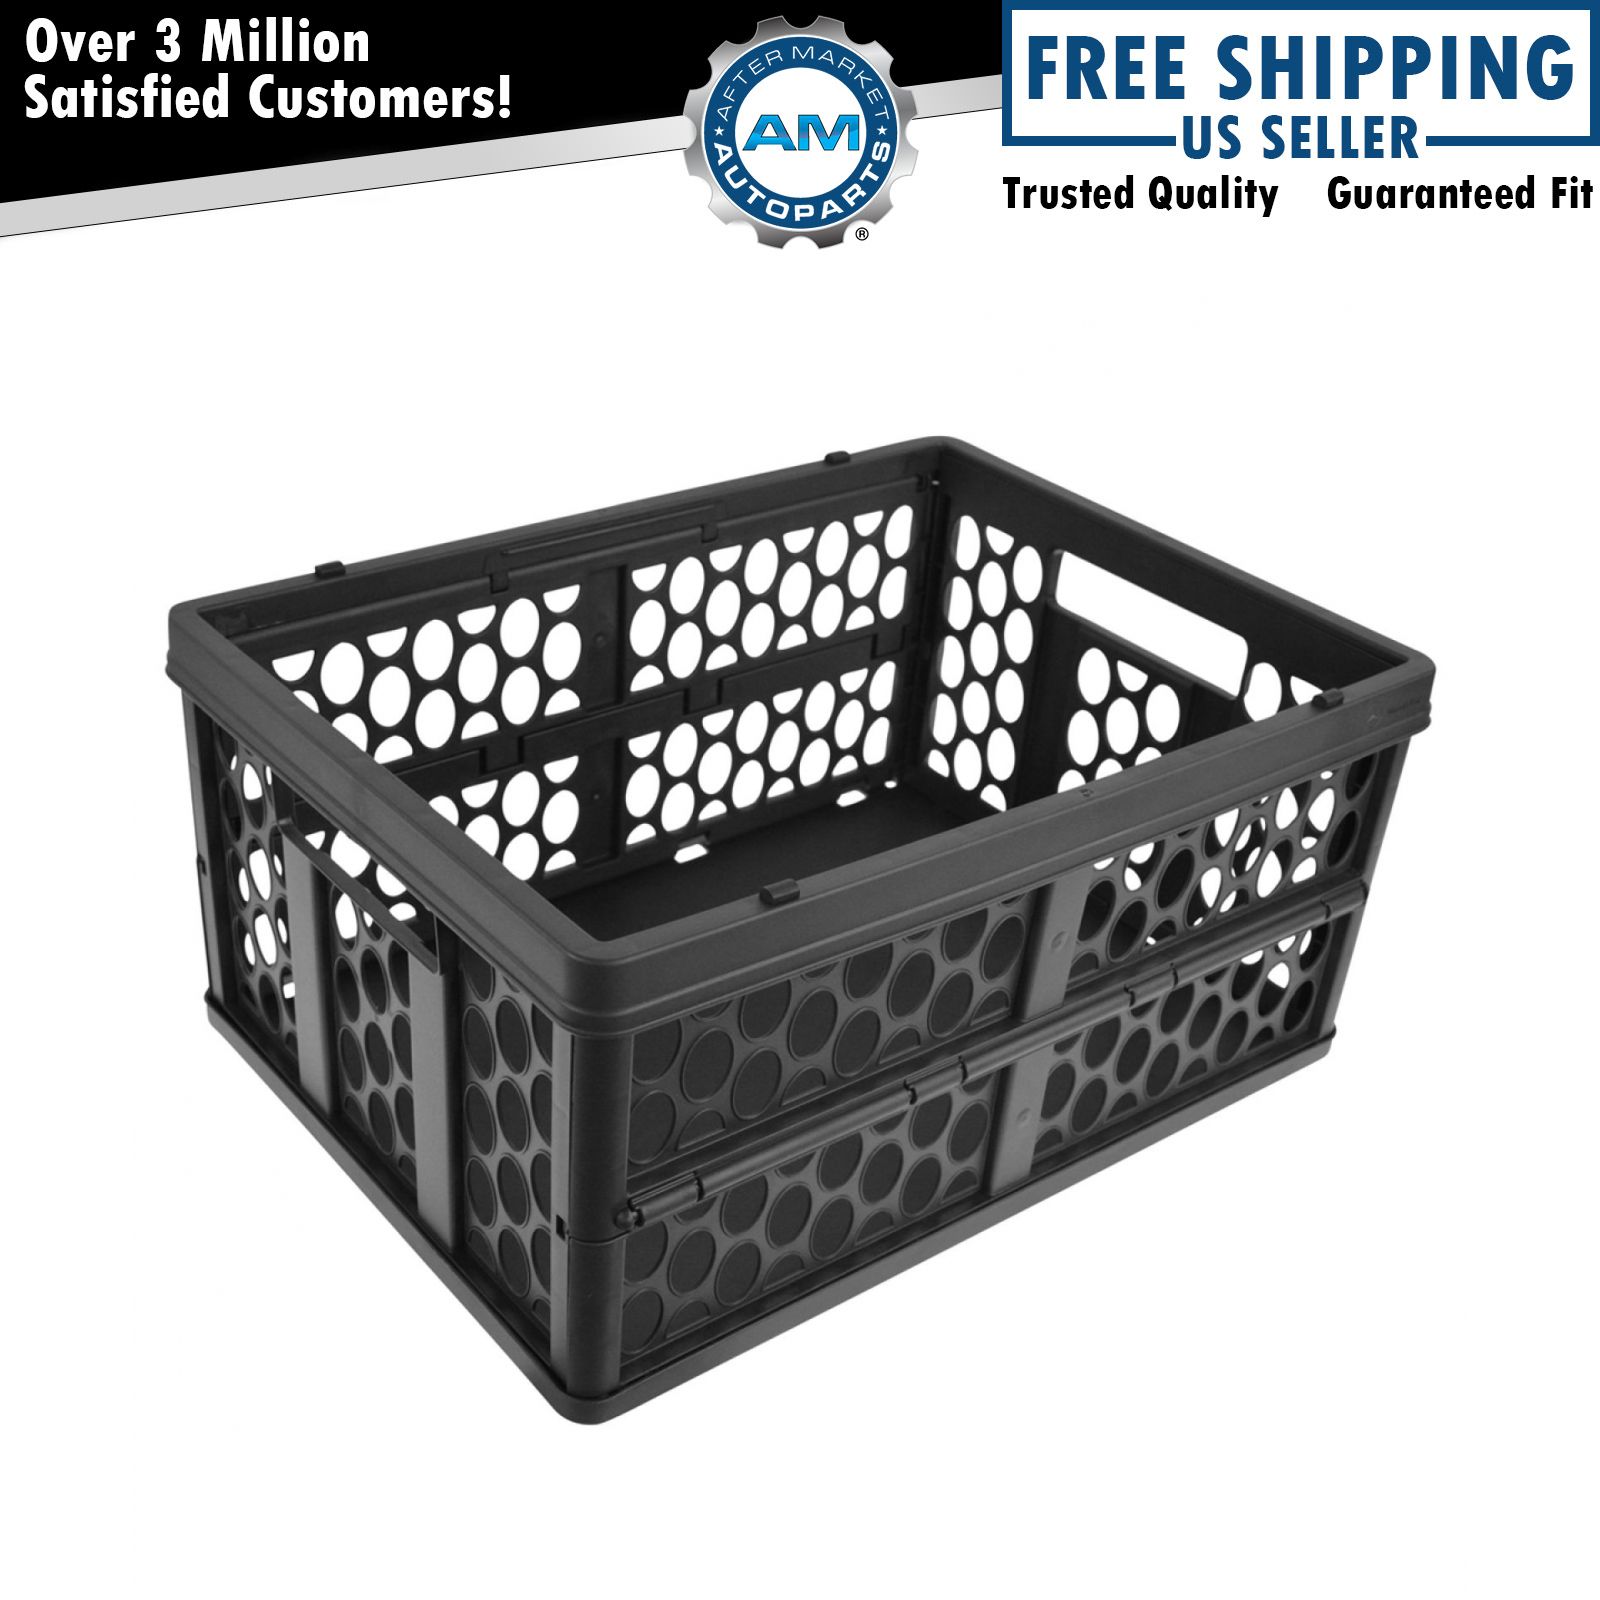 OEM 20384000 Collapsible Storage Bin Crate Basket Cargo Mount for Mercedes Benz